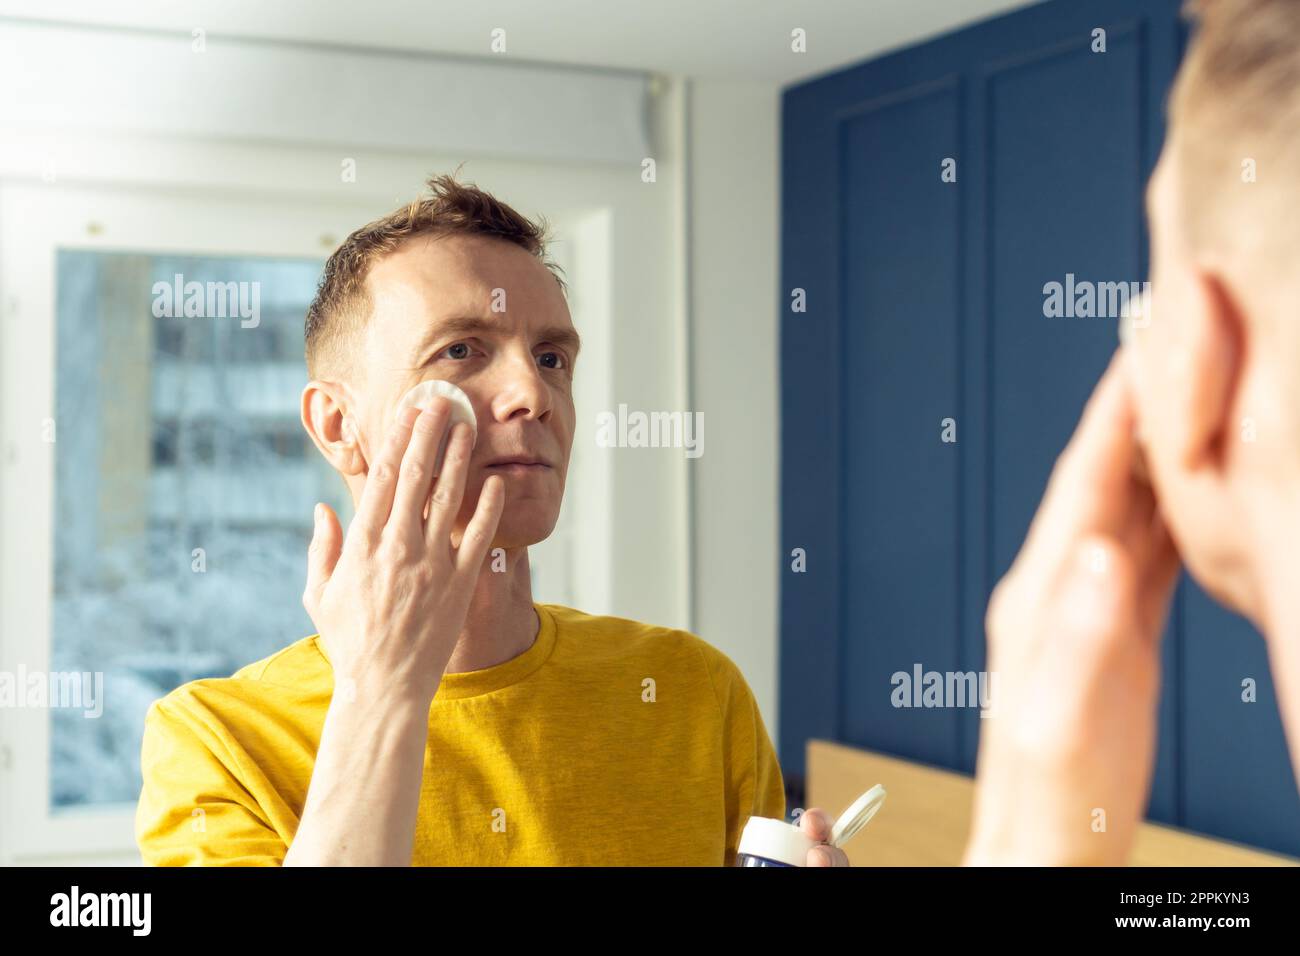 Mature man apply face tonic with cotton pad, then massage with hands. Male portrait in room mirror. Face cleansing. Stock Photo